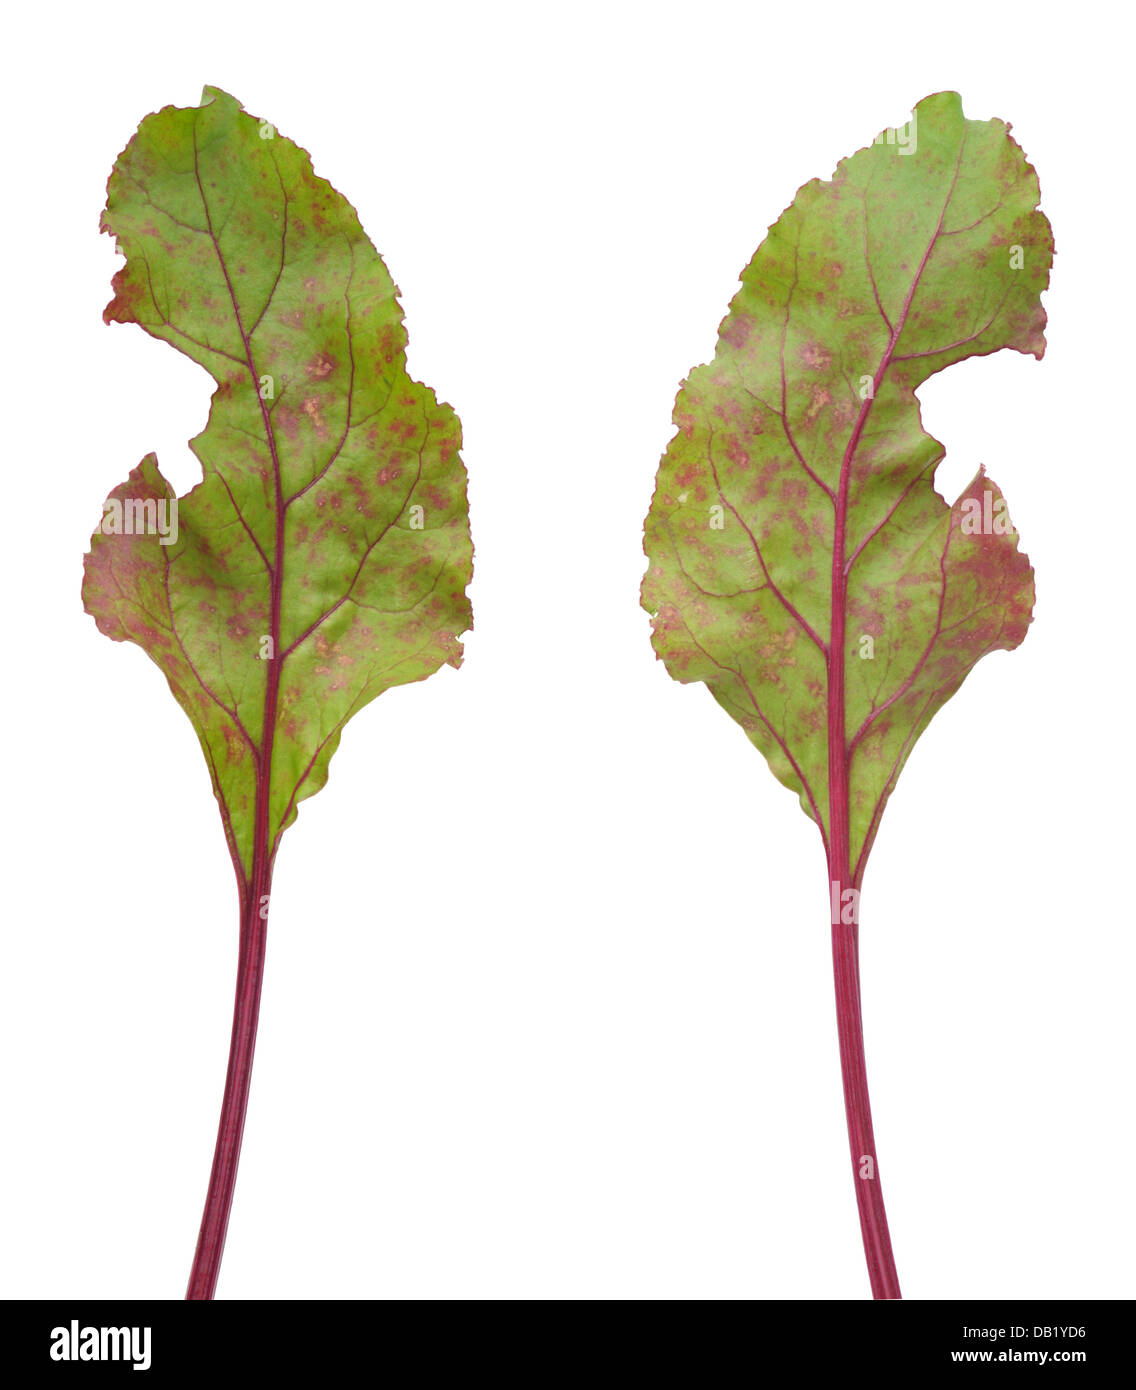 Infection of beetroot leaf by Cercospora beticola Stock Photo